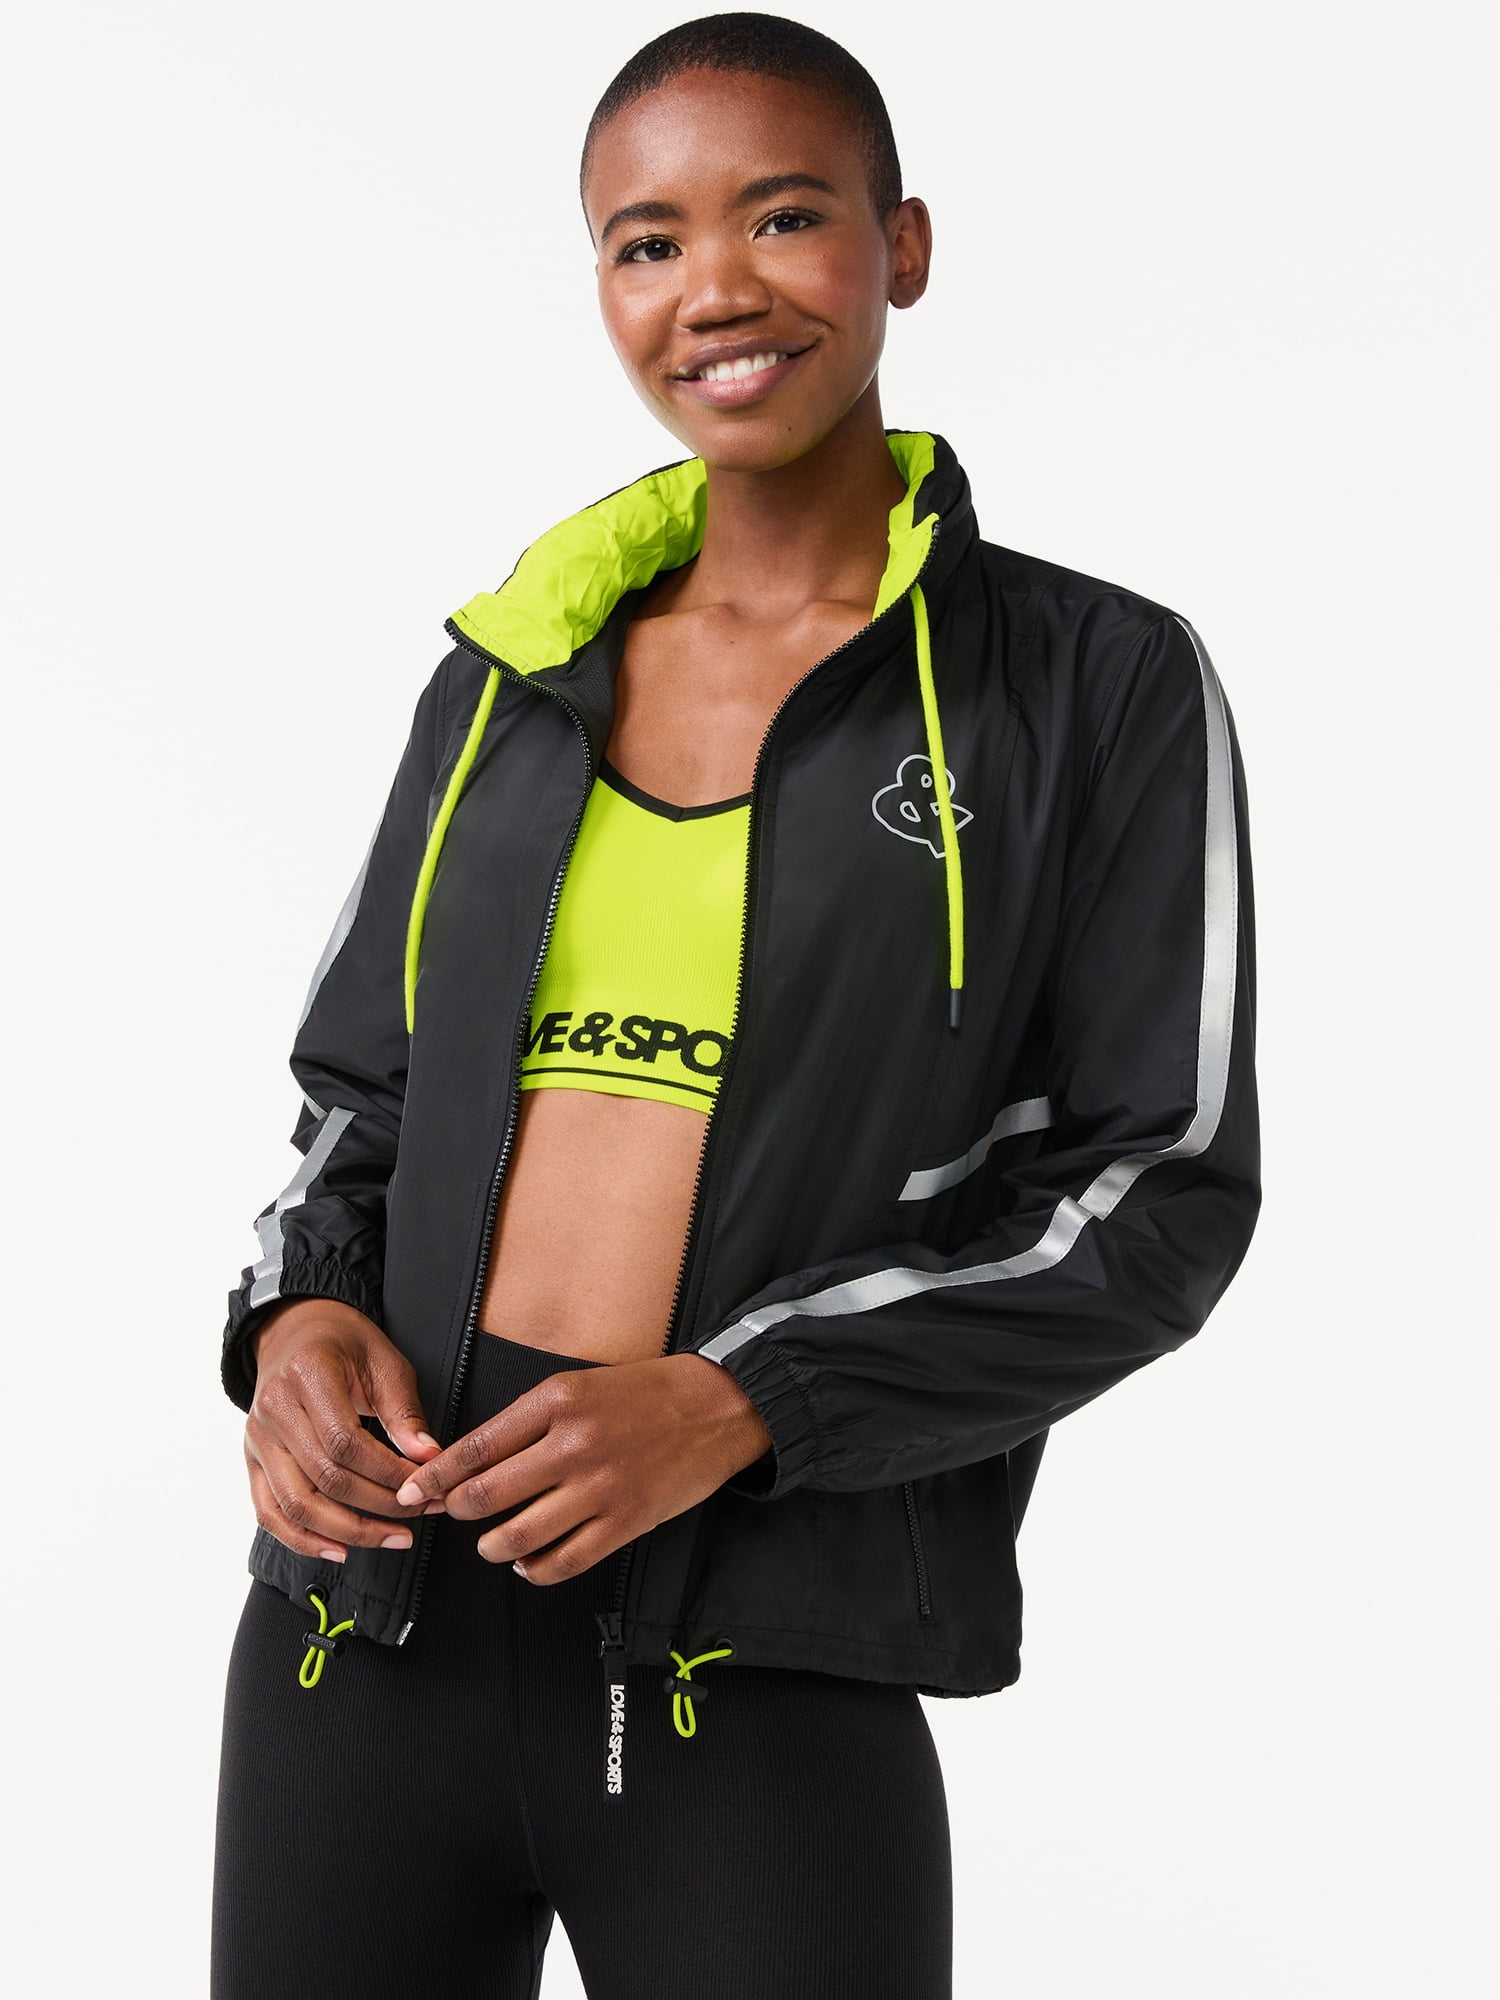 Love & Sports Women’s Track Jacket with Hood